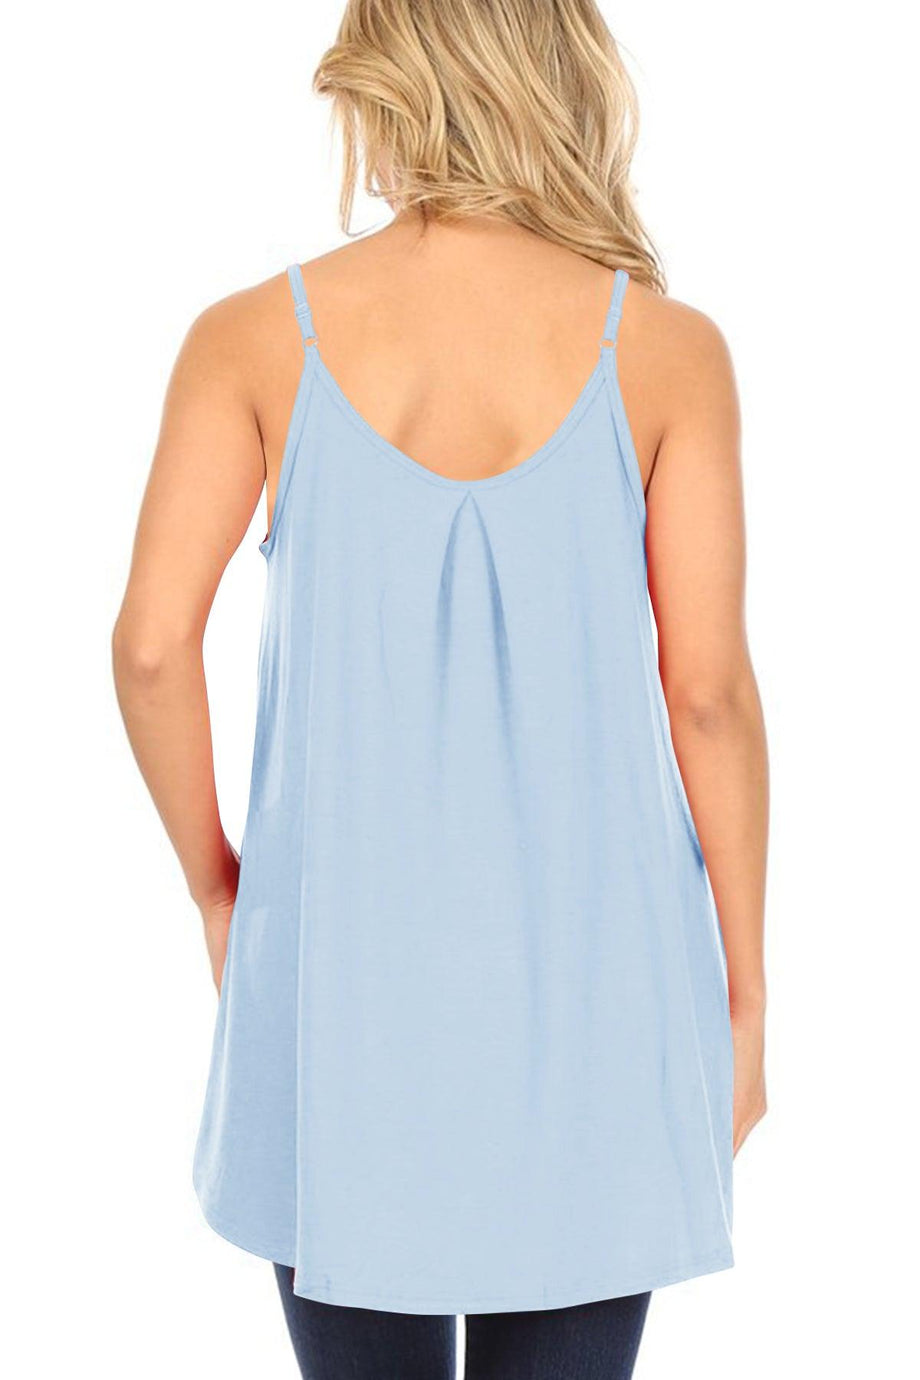 Solid Scoop-Neck Cami with Spaghetti Straps